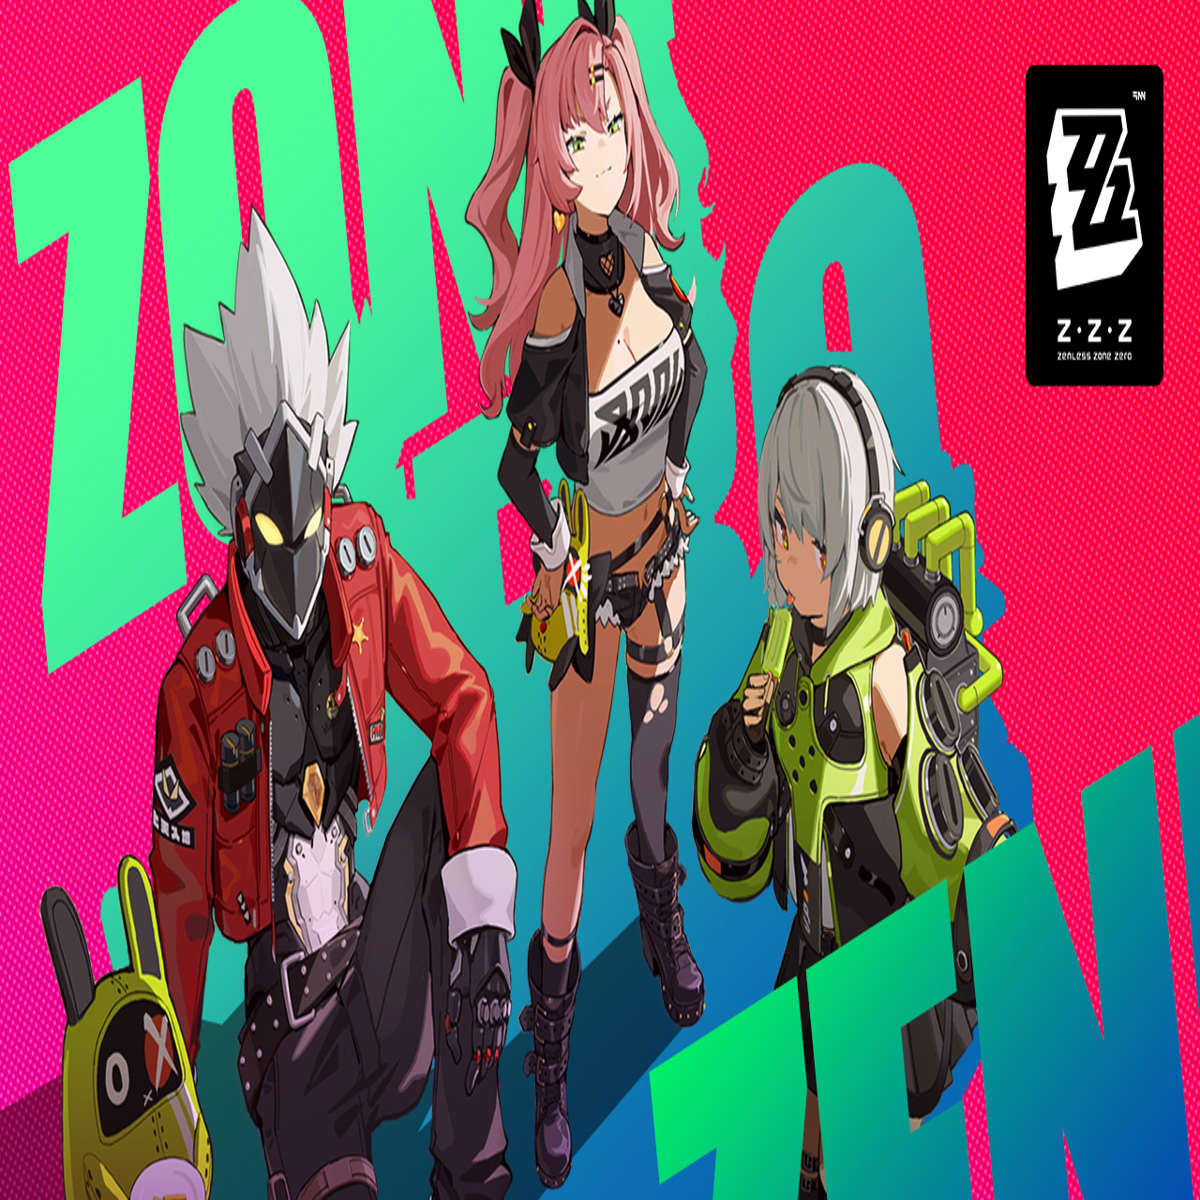 Zenless Zone Zero Fans Cry Censorship Over Character Being Made To Wear A  Bra - GamerBraves